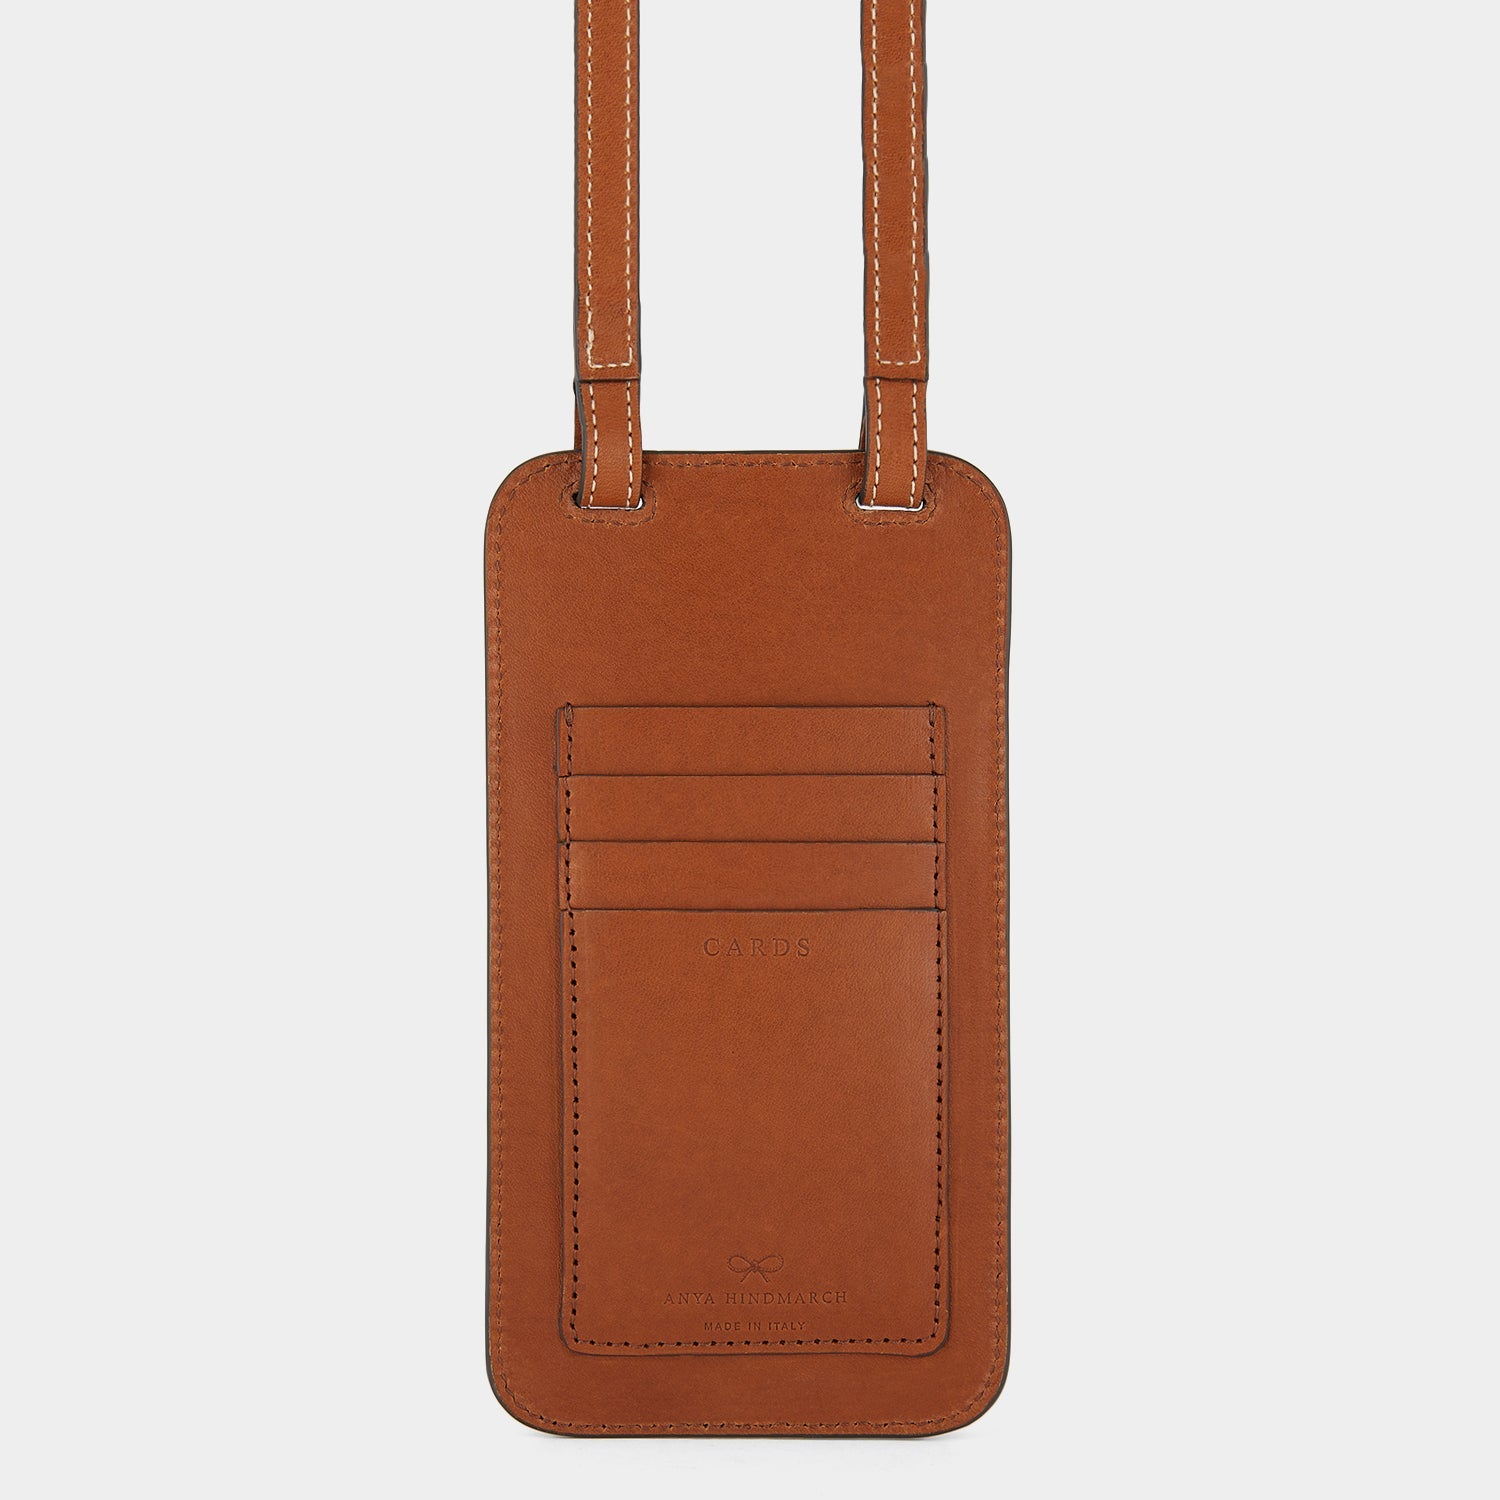 「Return to Nature」 スマホ ポーチ -

                  
                    Compostable Leather in Tan -
                  

                  Anya Hindmarch JP
